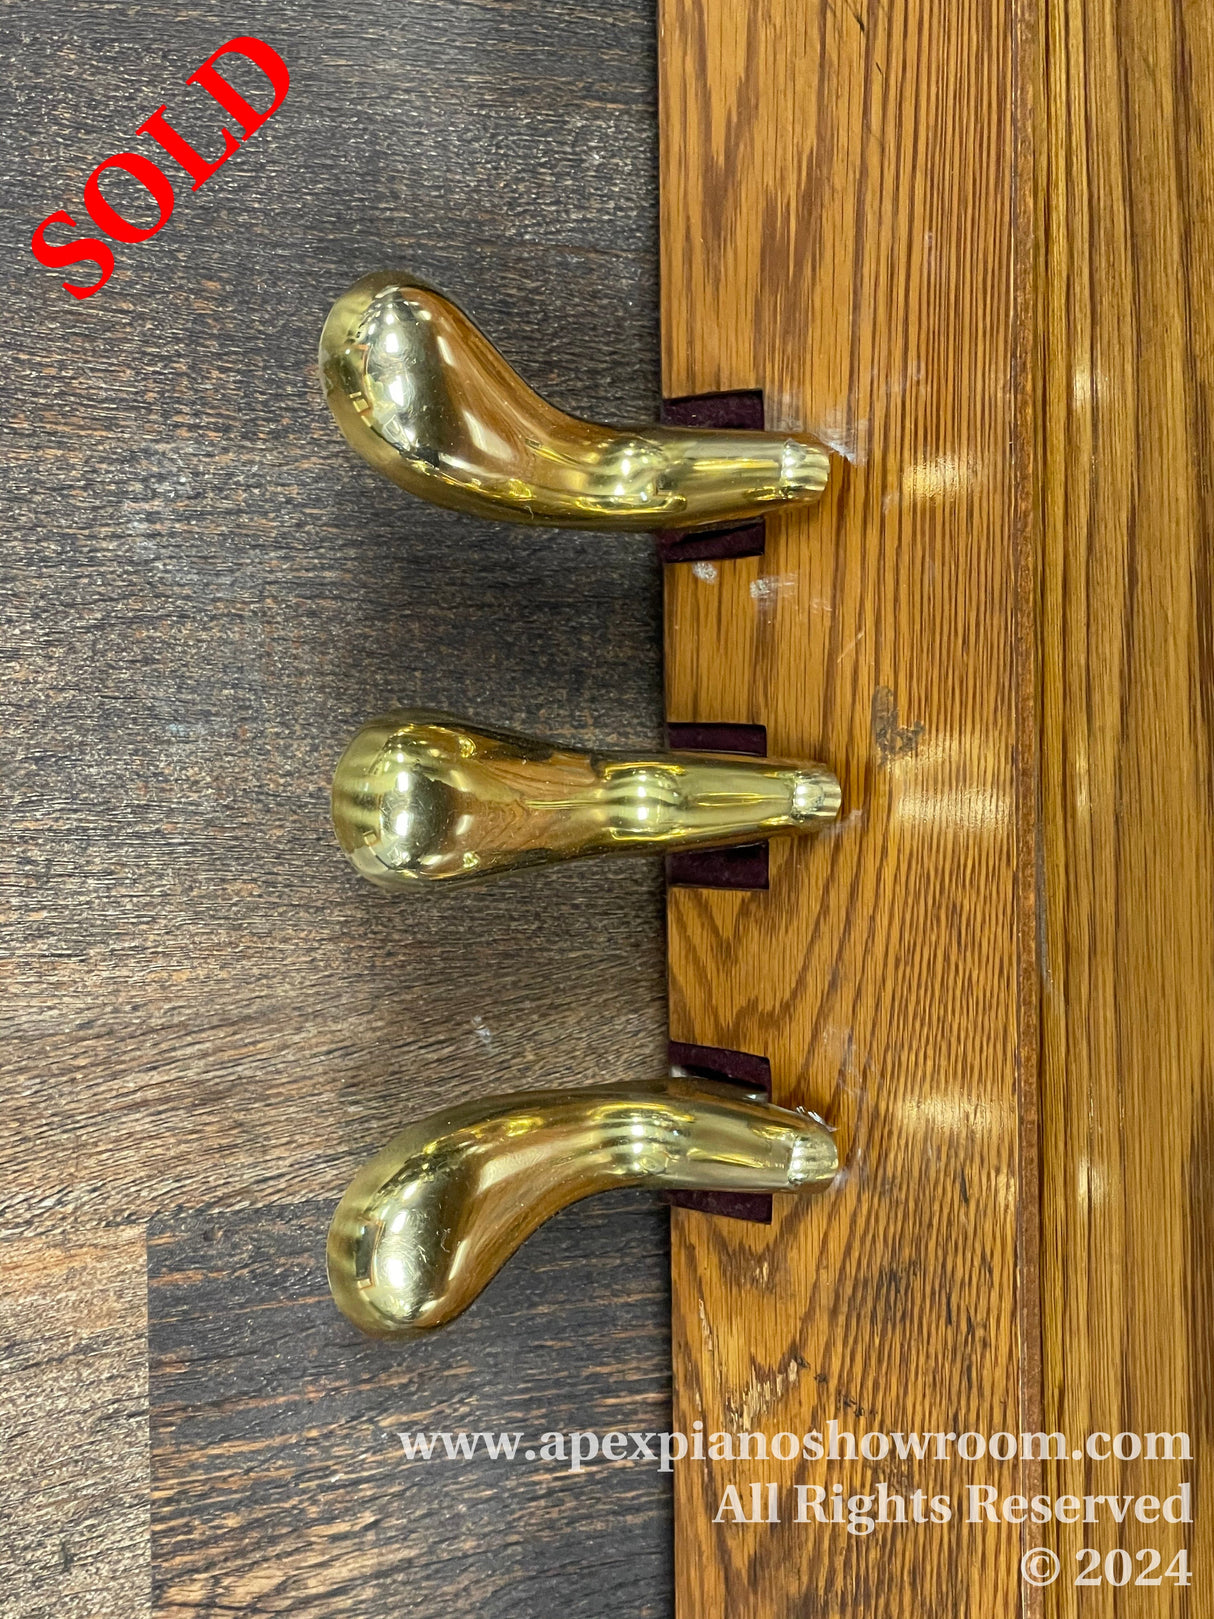 Glossy golden piano legs with casters attached to the bottom of a wooden piano, showcasing crafted curvature and polished finish on a hardwood floor.